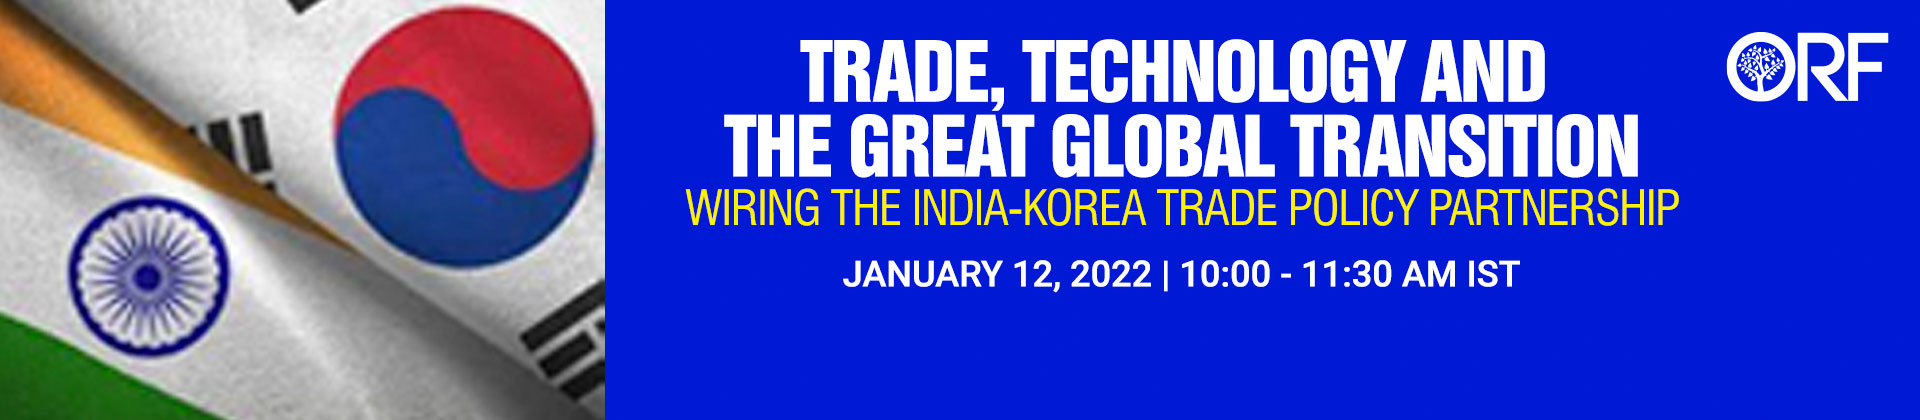 Trade, Technology and the Great Global Transition: Wiring the India-Korea Trade Policy Partnership